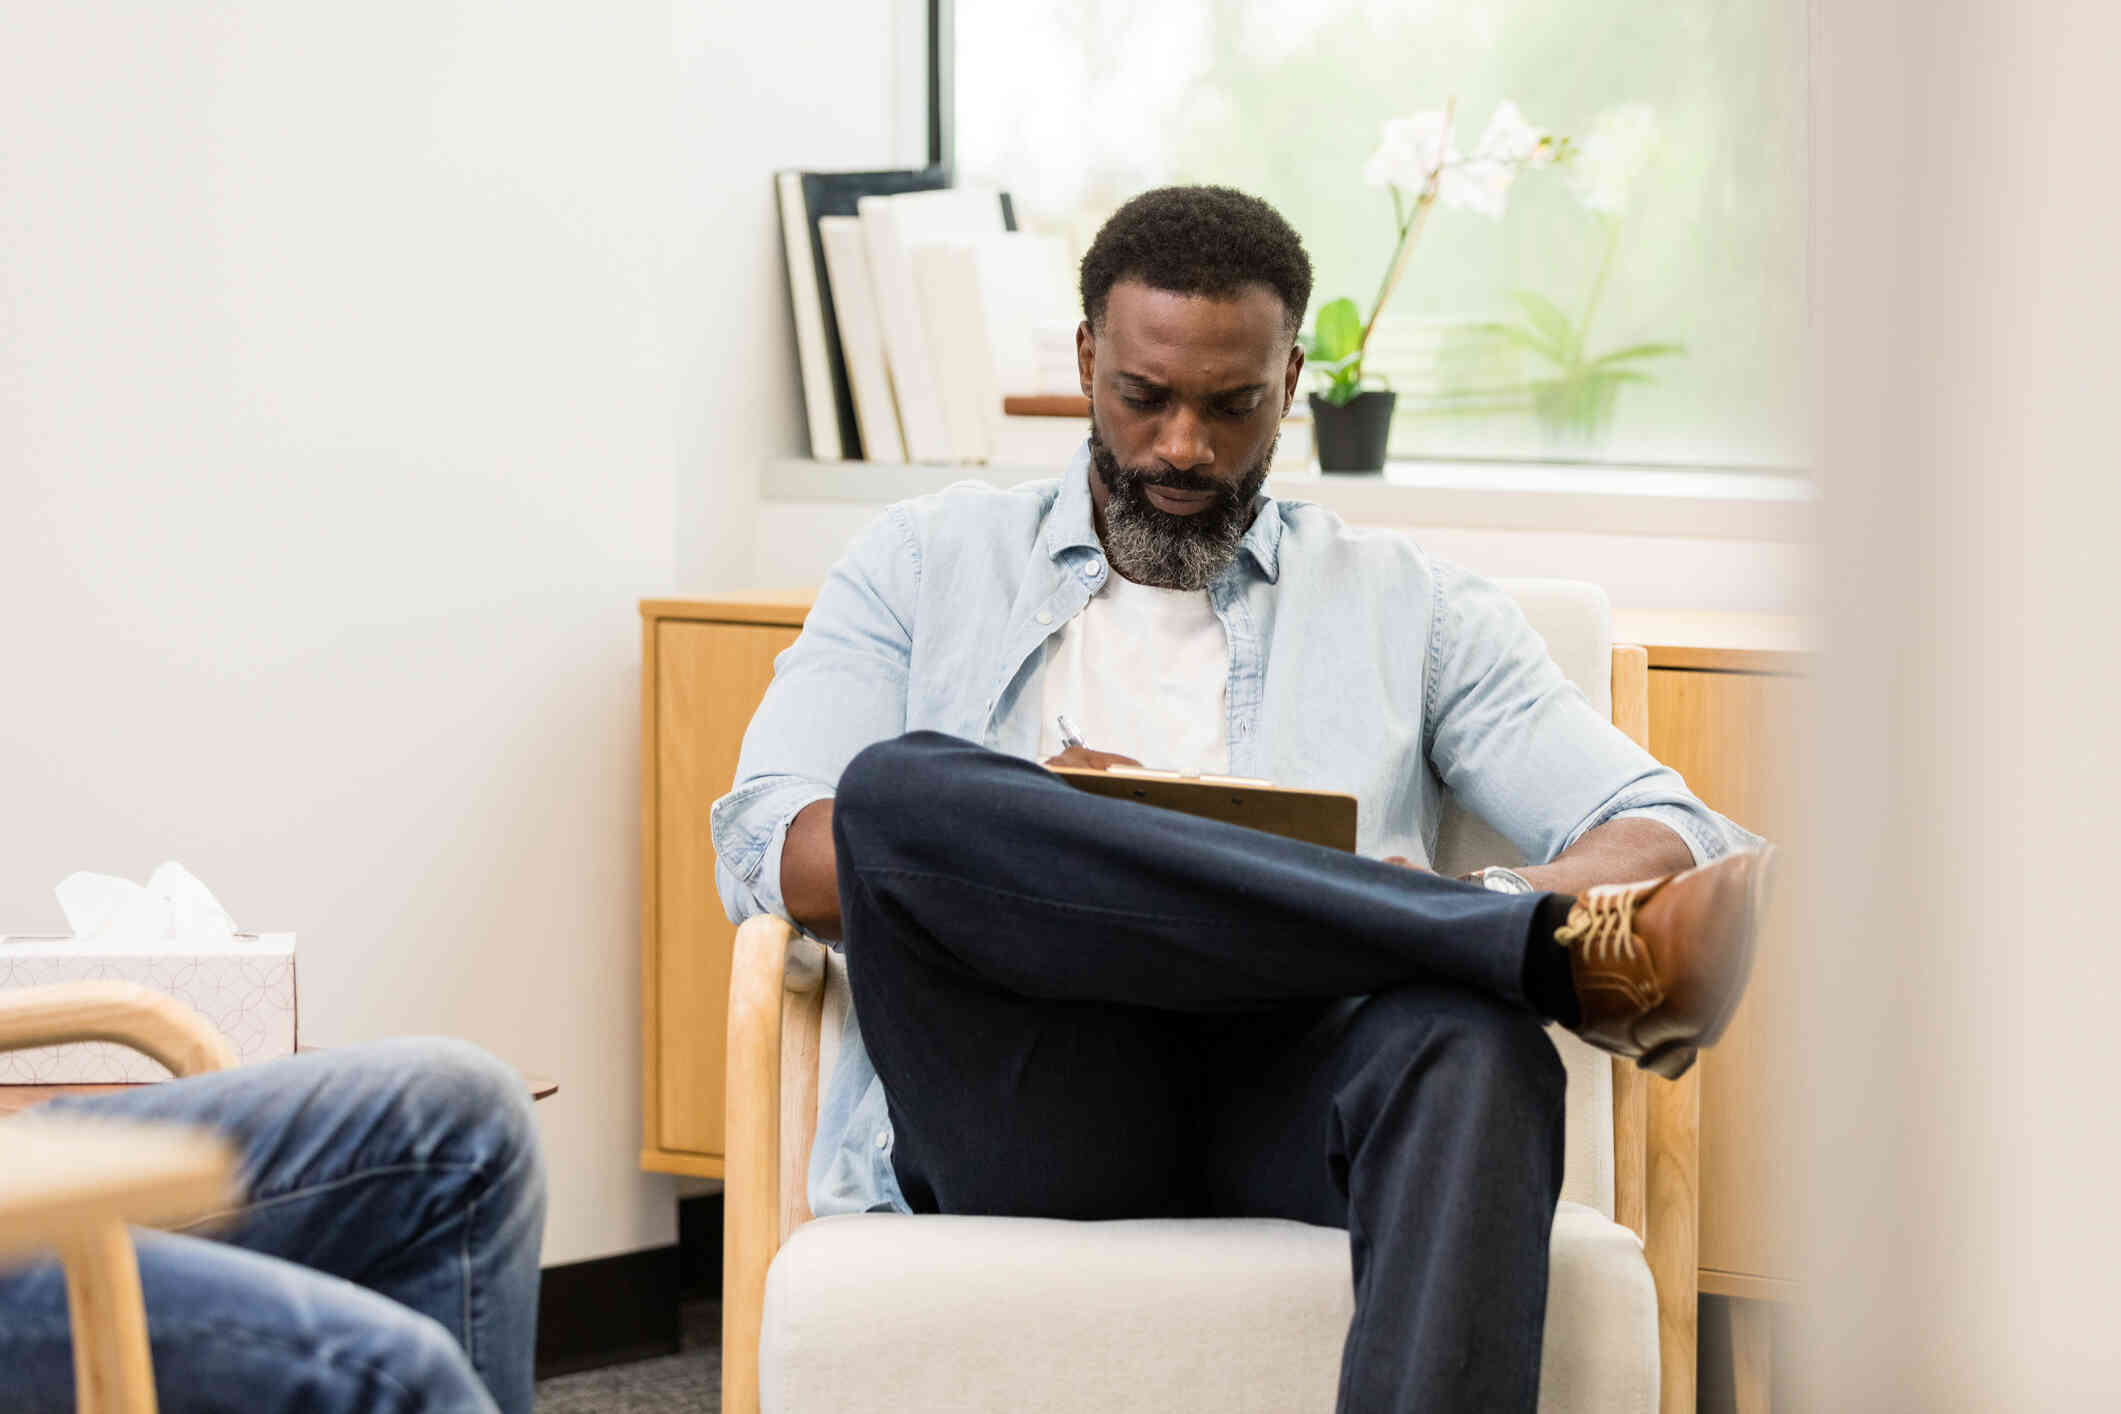 A close up of a male therapist as helsits in a chair and looks down at the clipboard in his lap while sitting near his male patient during a therapy session.